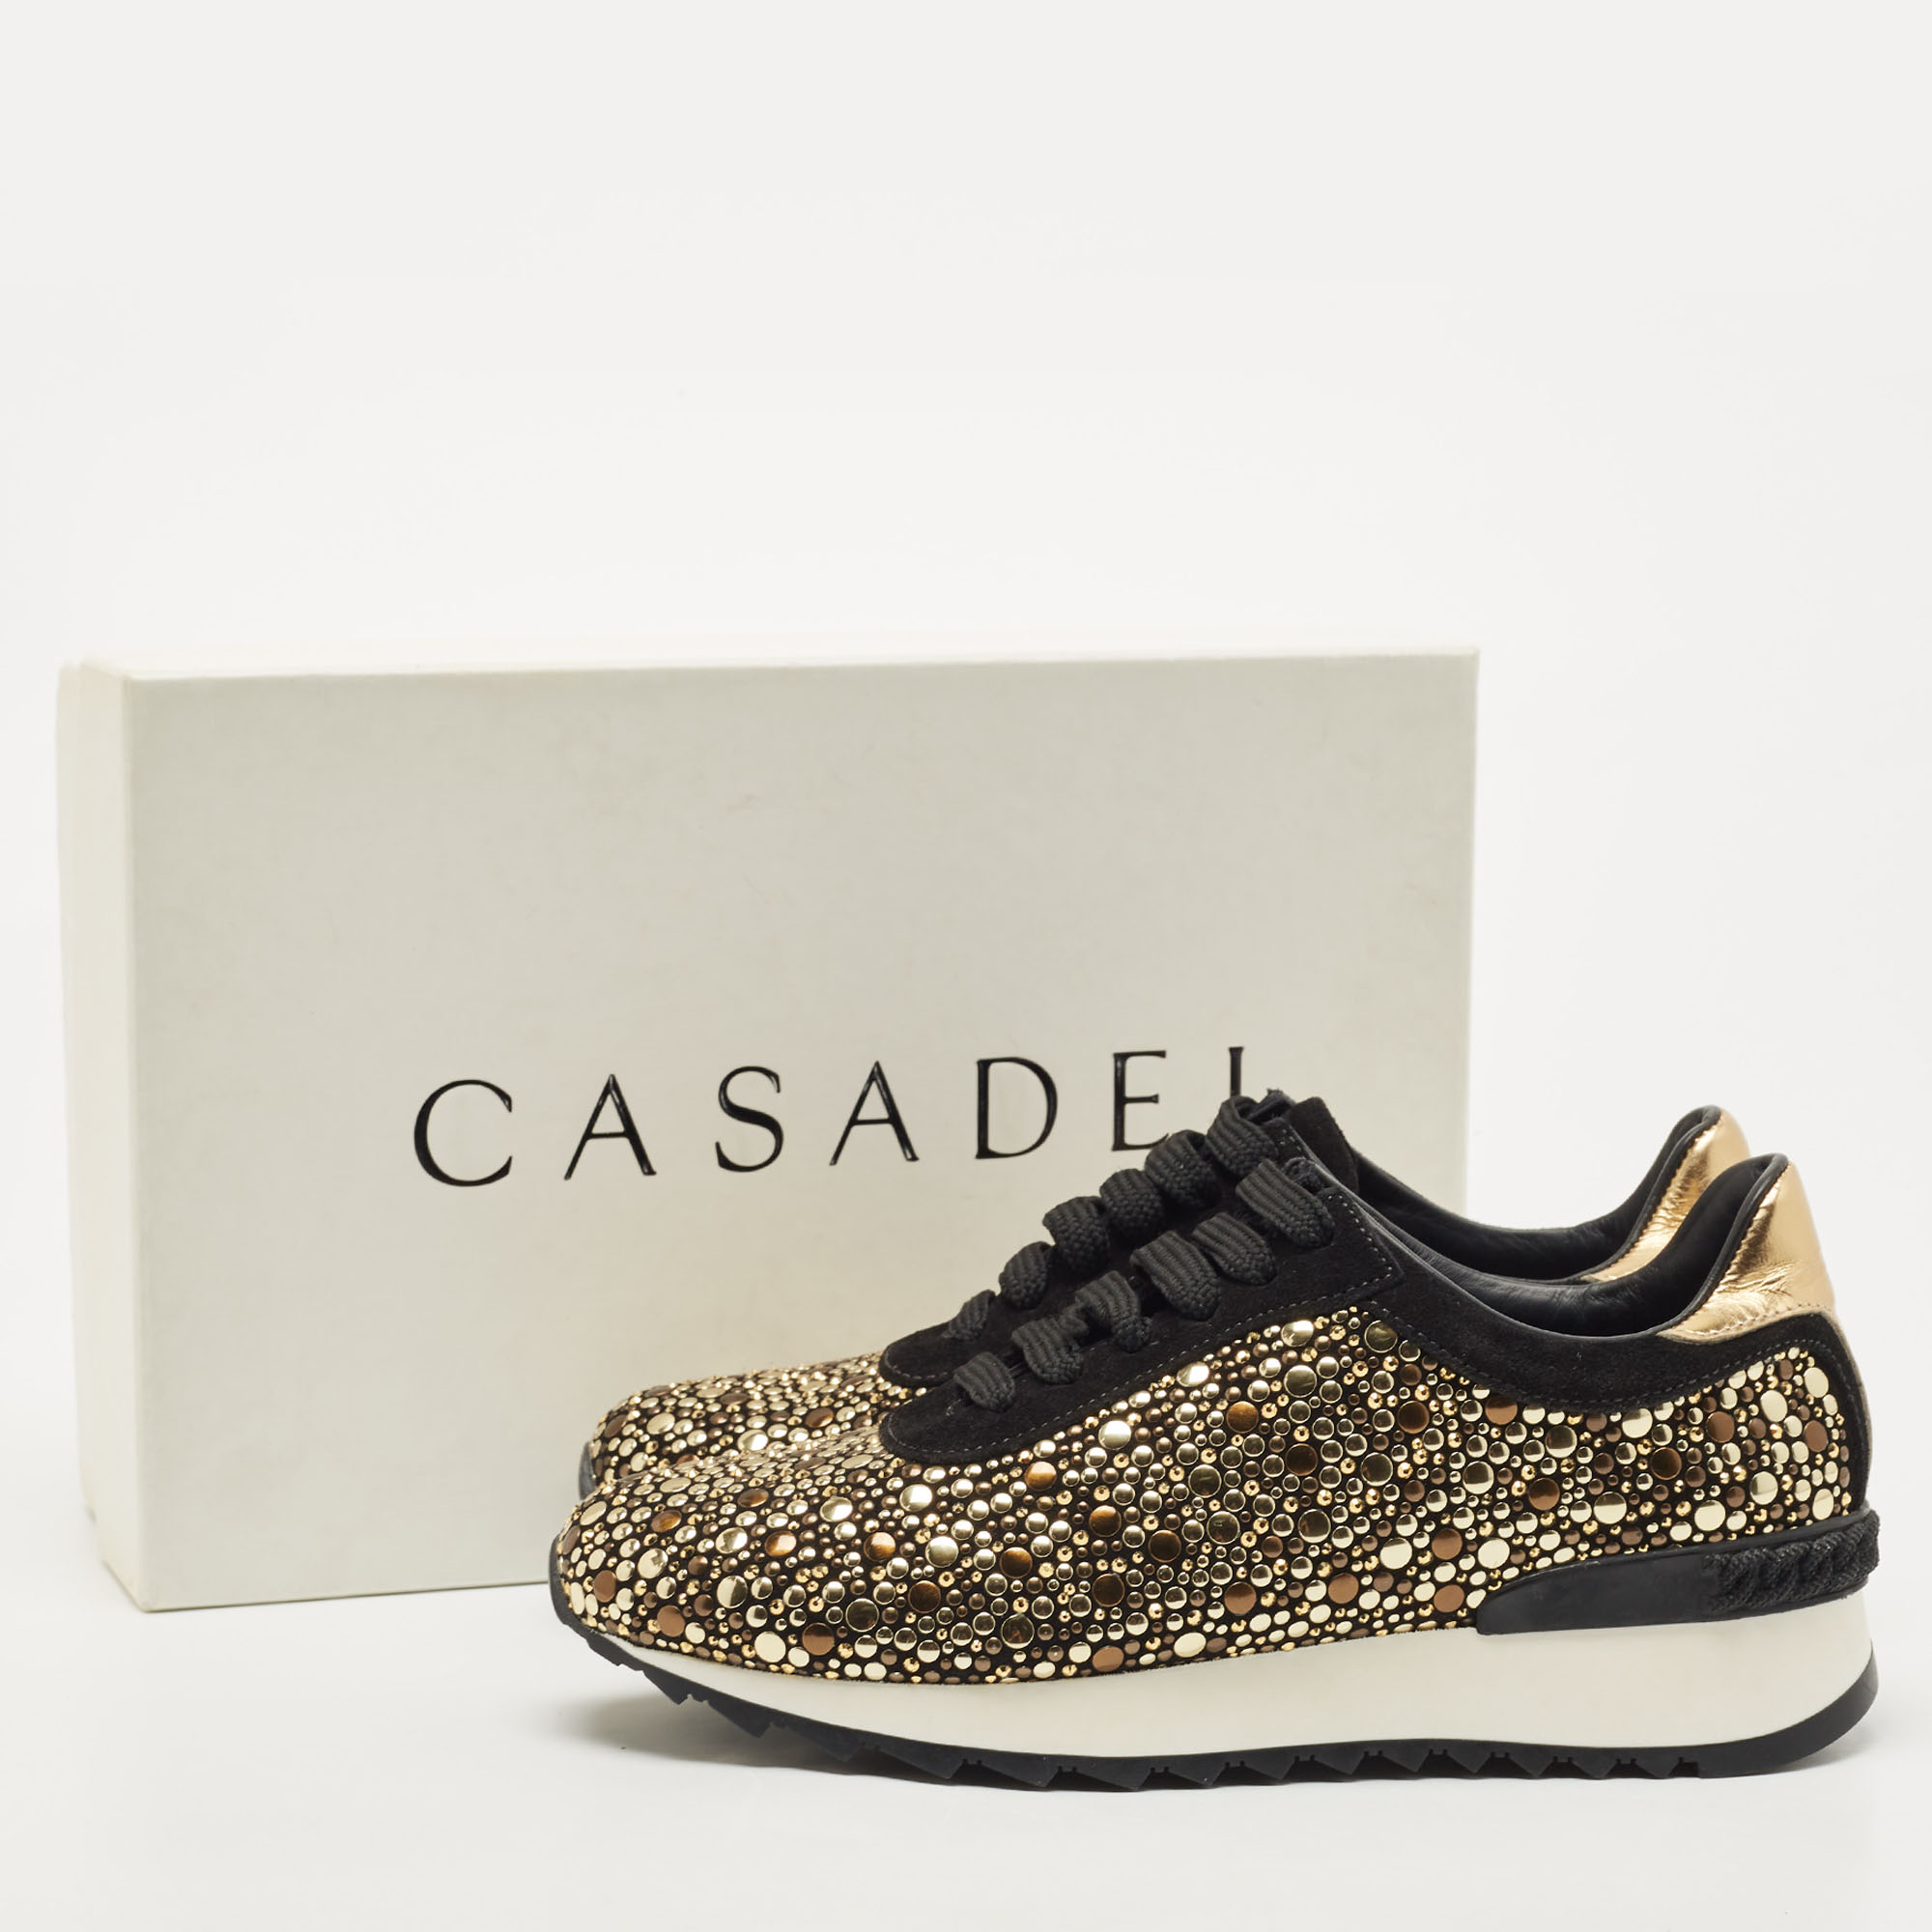 Casadei Black/Gold Suede And Leather Studded Low Top Sneakers Size 37